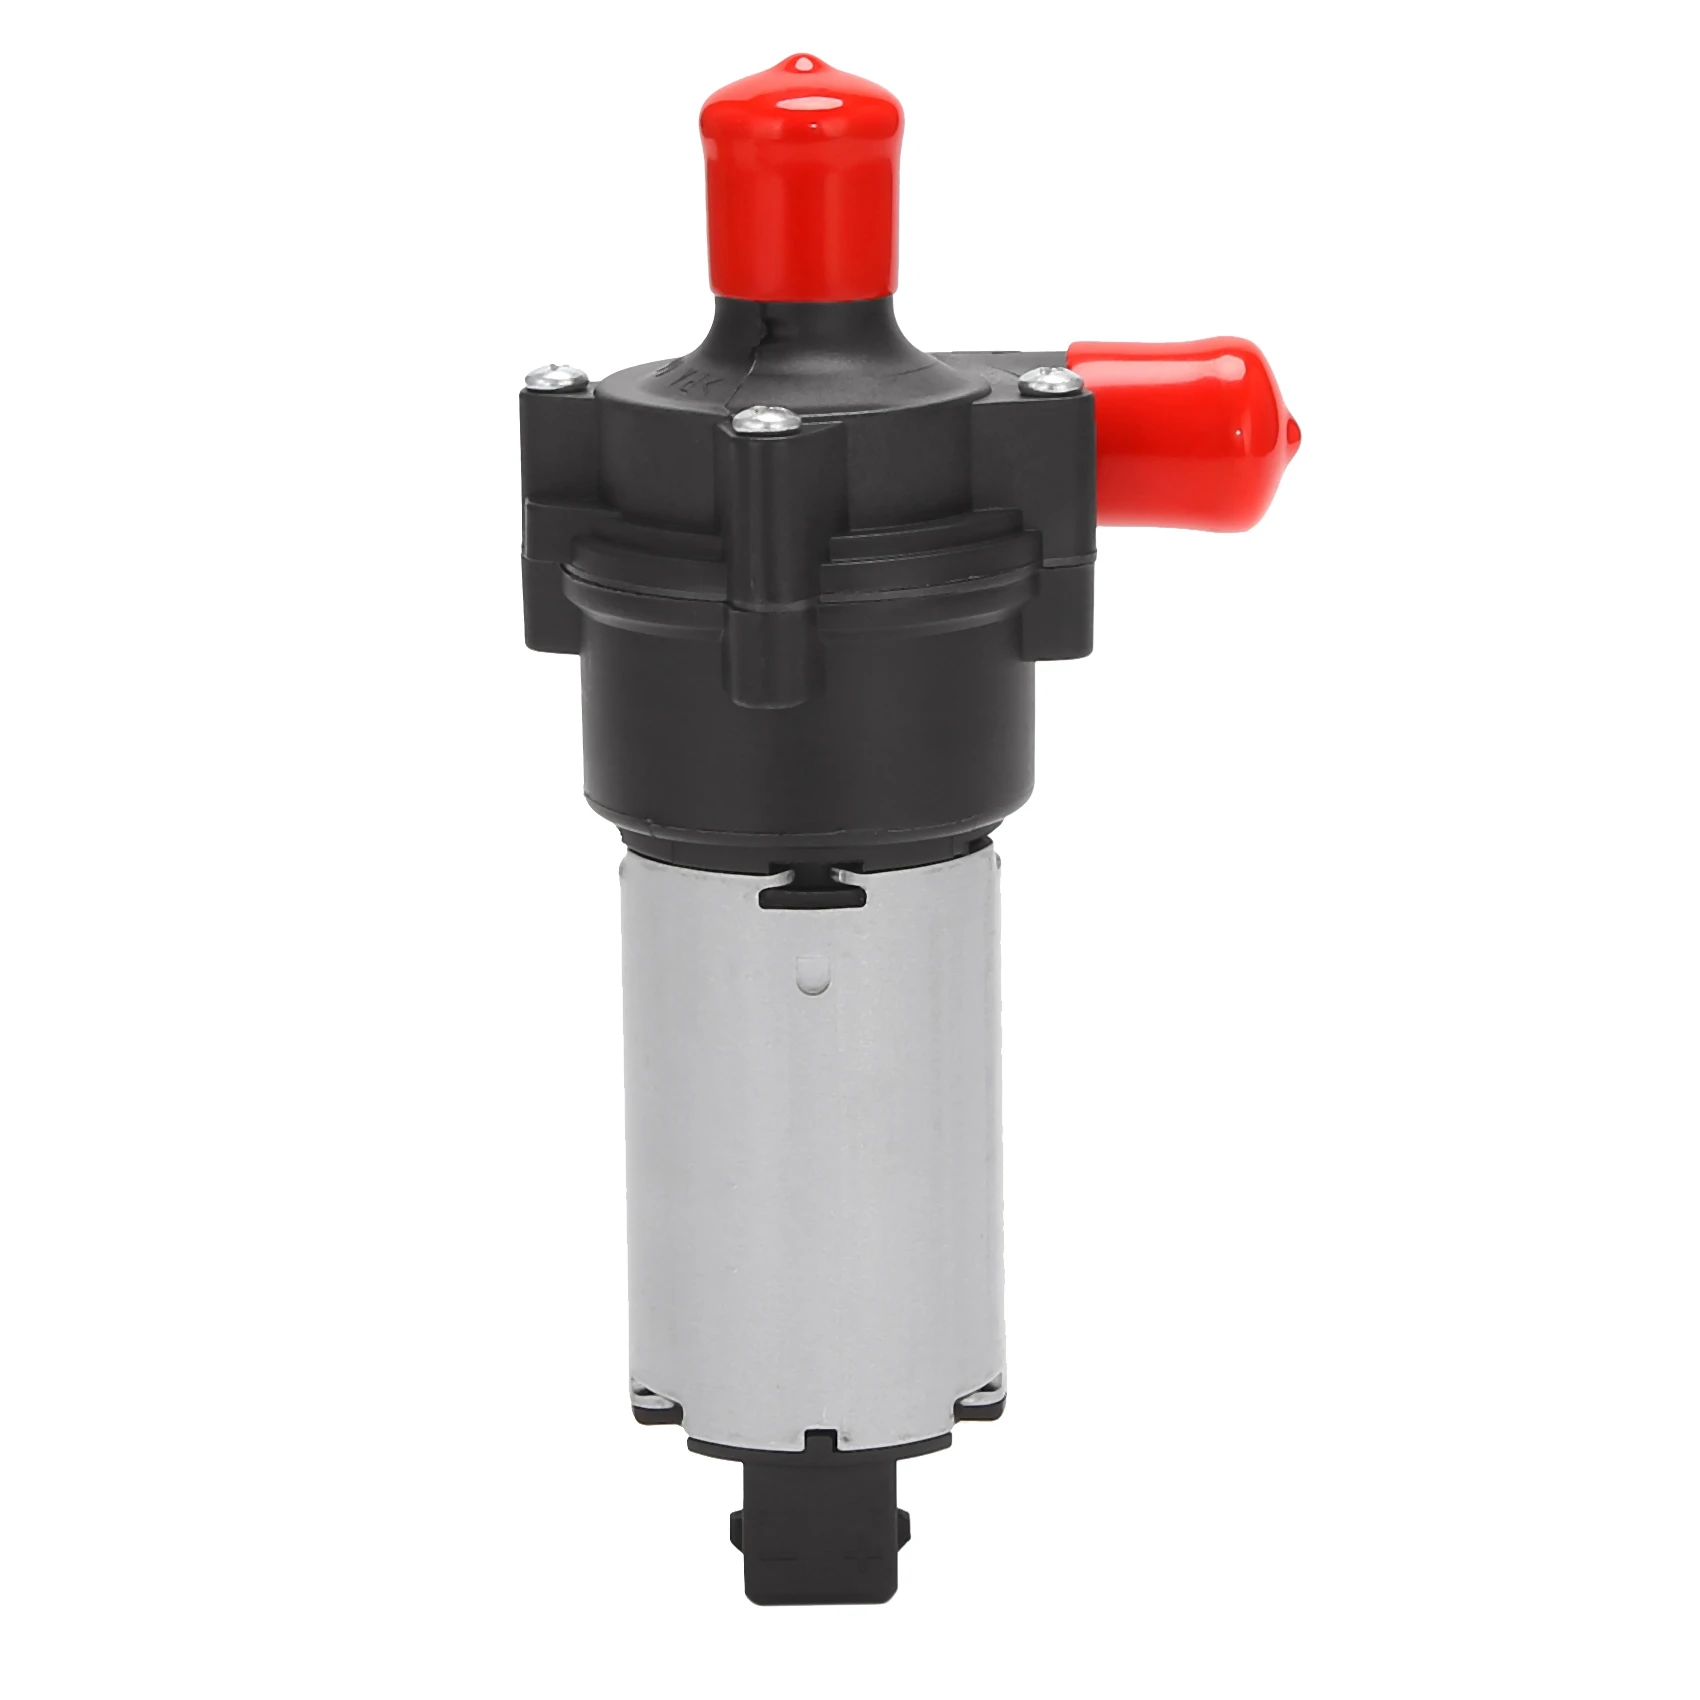 

Car Heater Water Valve Auxiliary Water Pump for Mercedes-Benz M-CLASS SUV W163 0018356064 ‎001 835 60